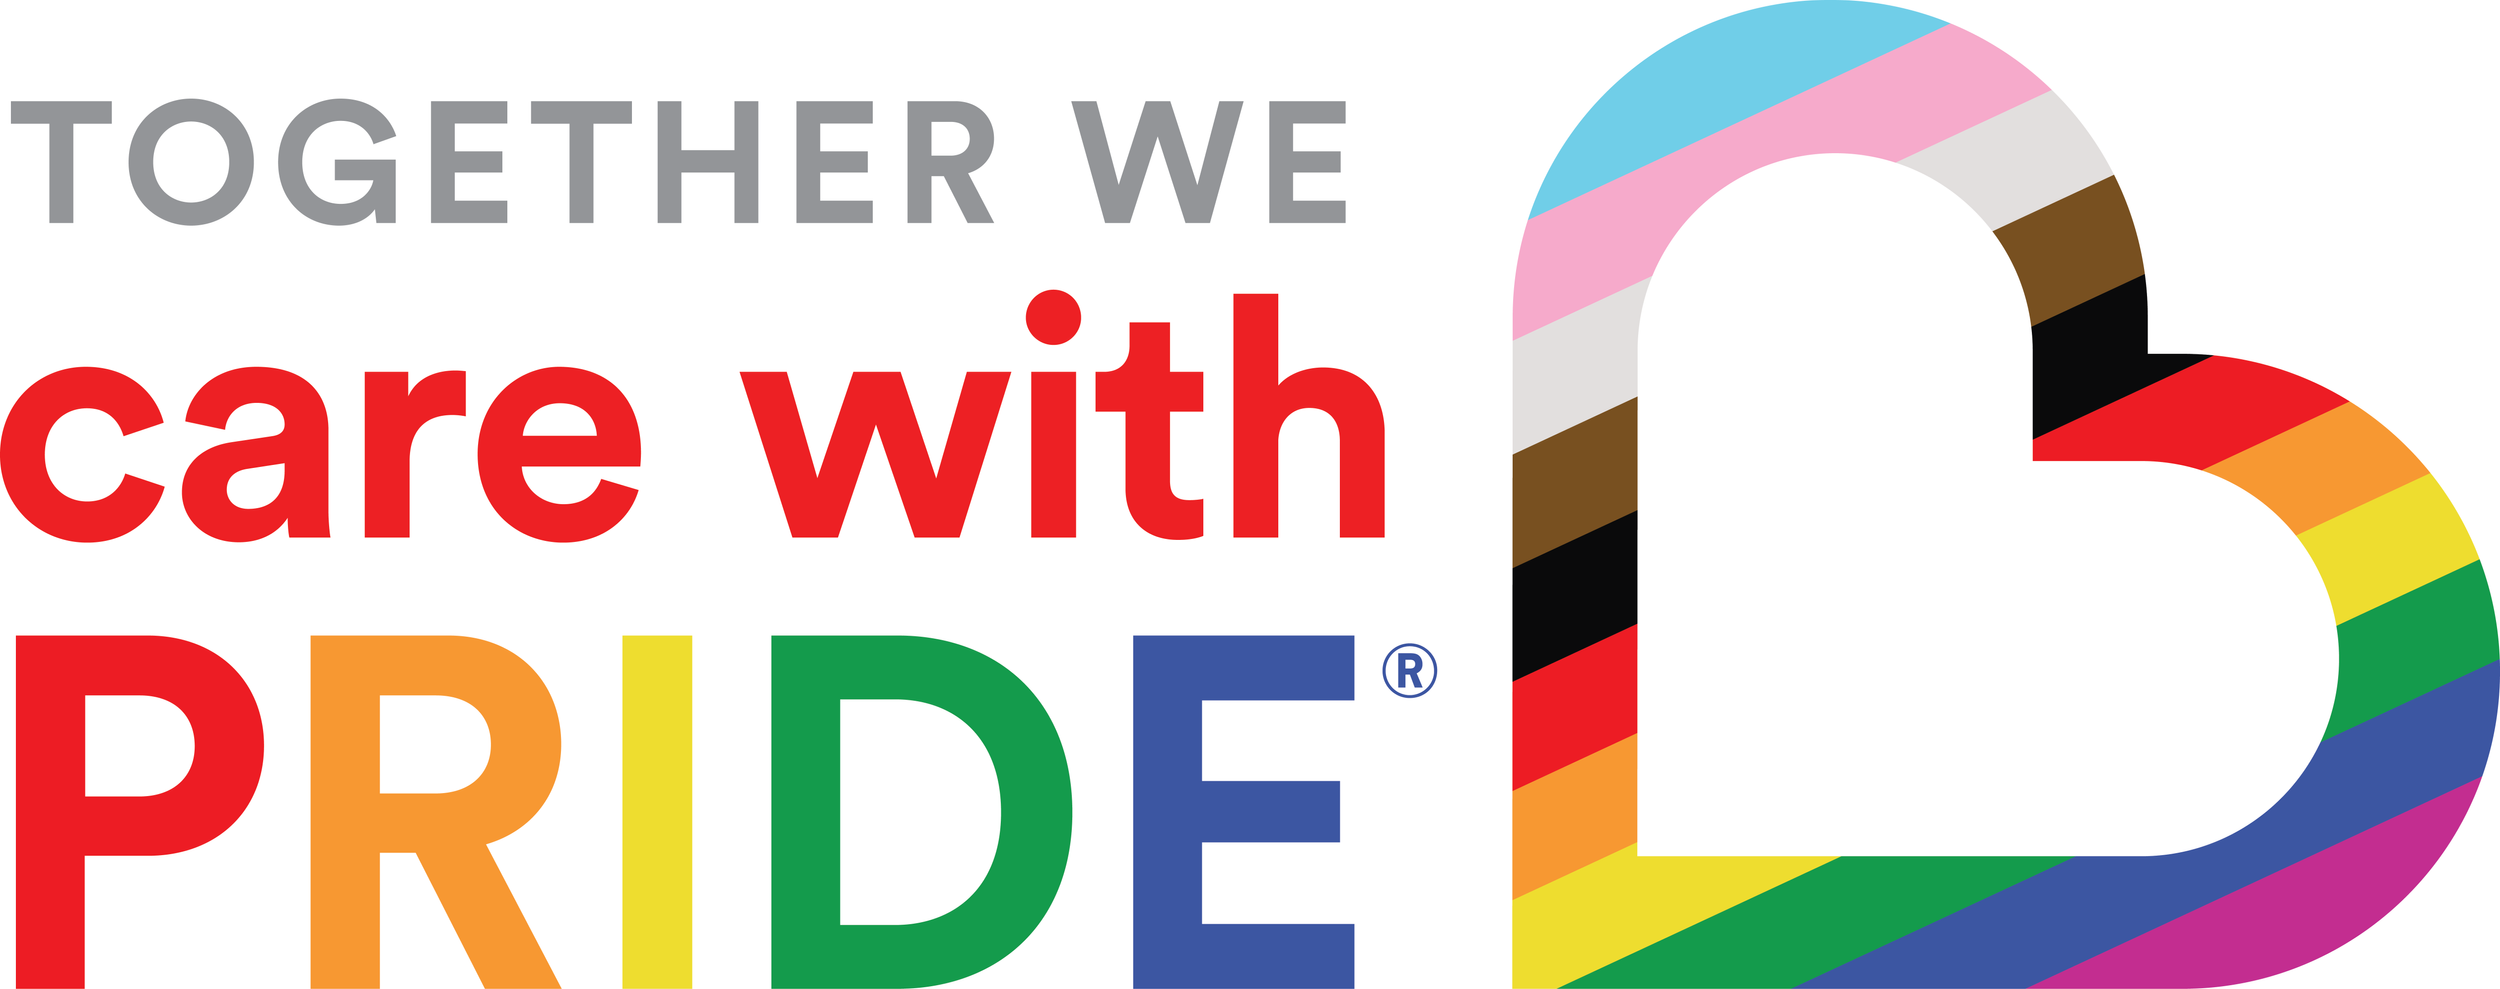 Care with Pride logo only, NO JNJ logo - Zac Walker.png